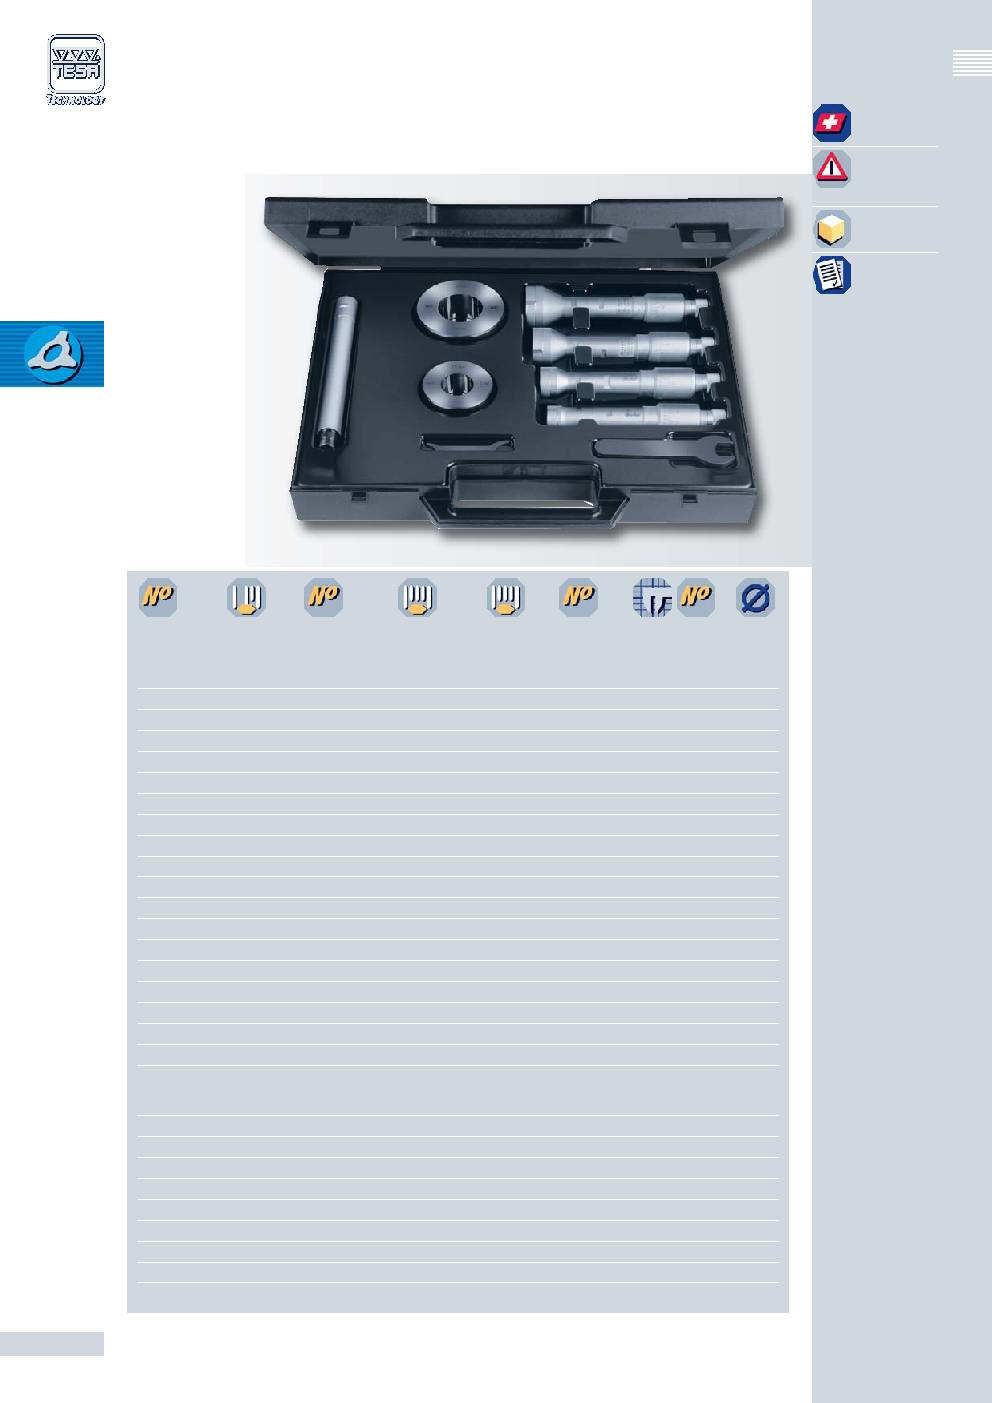 ETALON INTALOMETER 51 Metric Tool Sets For technical data, see page C-21. For setting rings, report to page C-24.